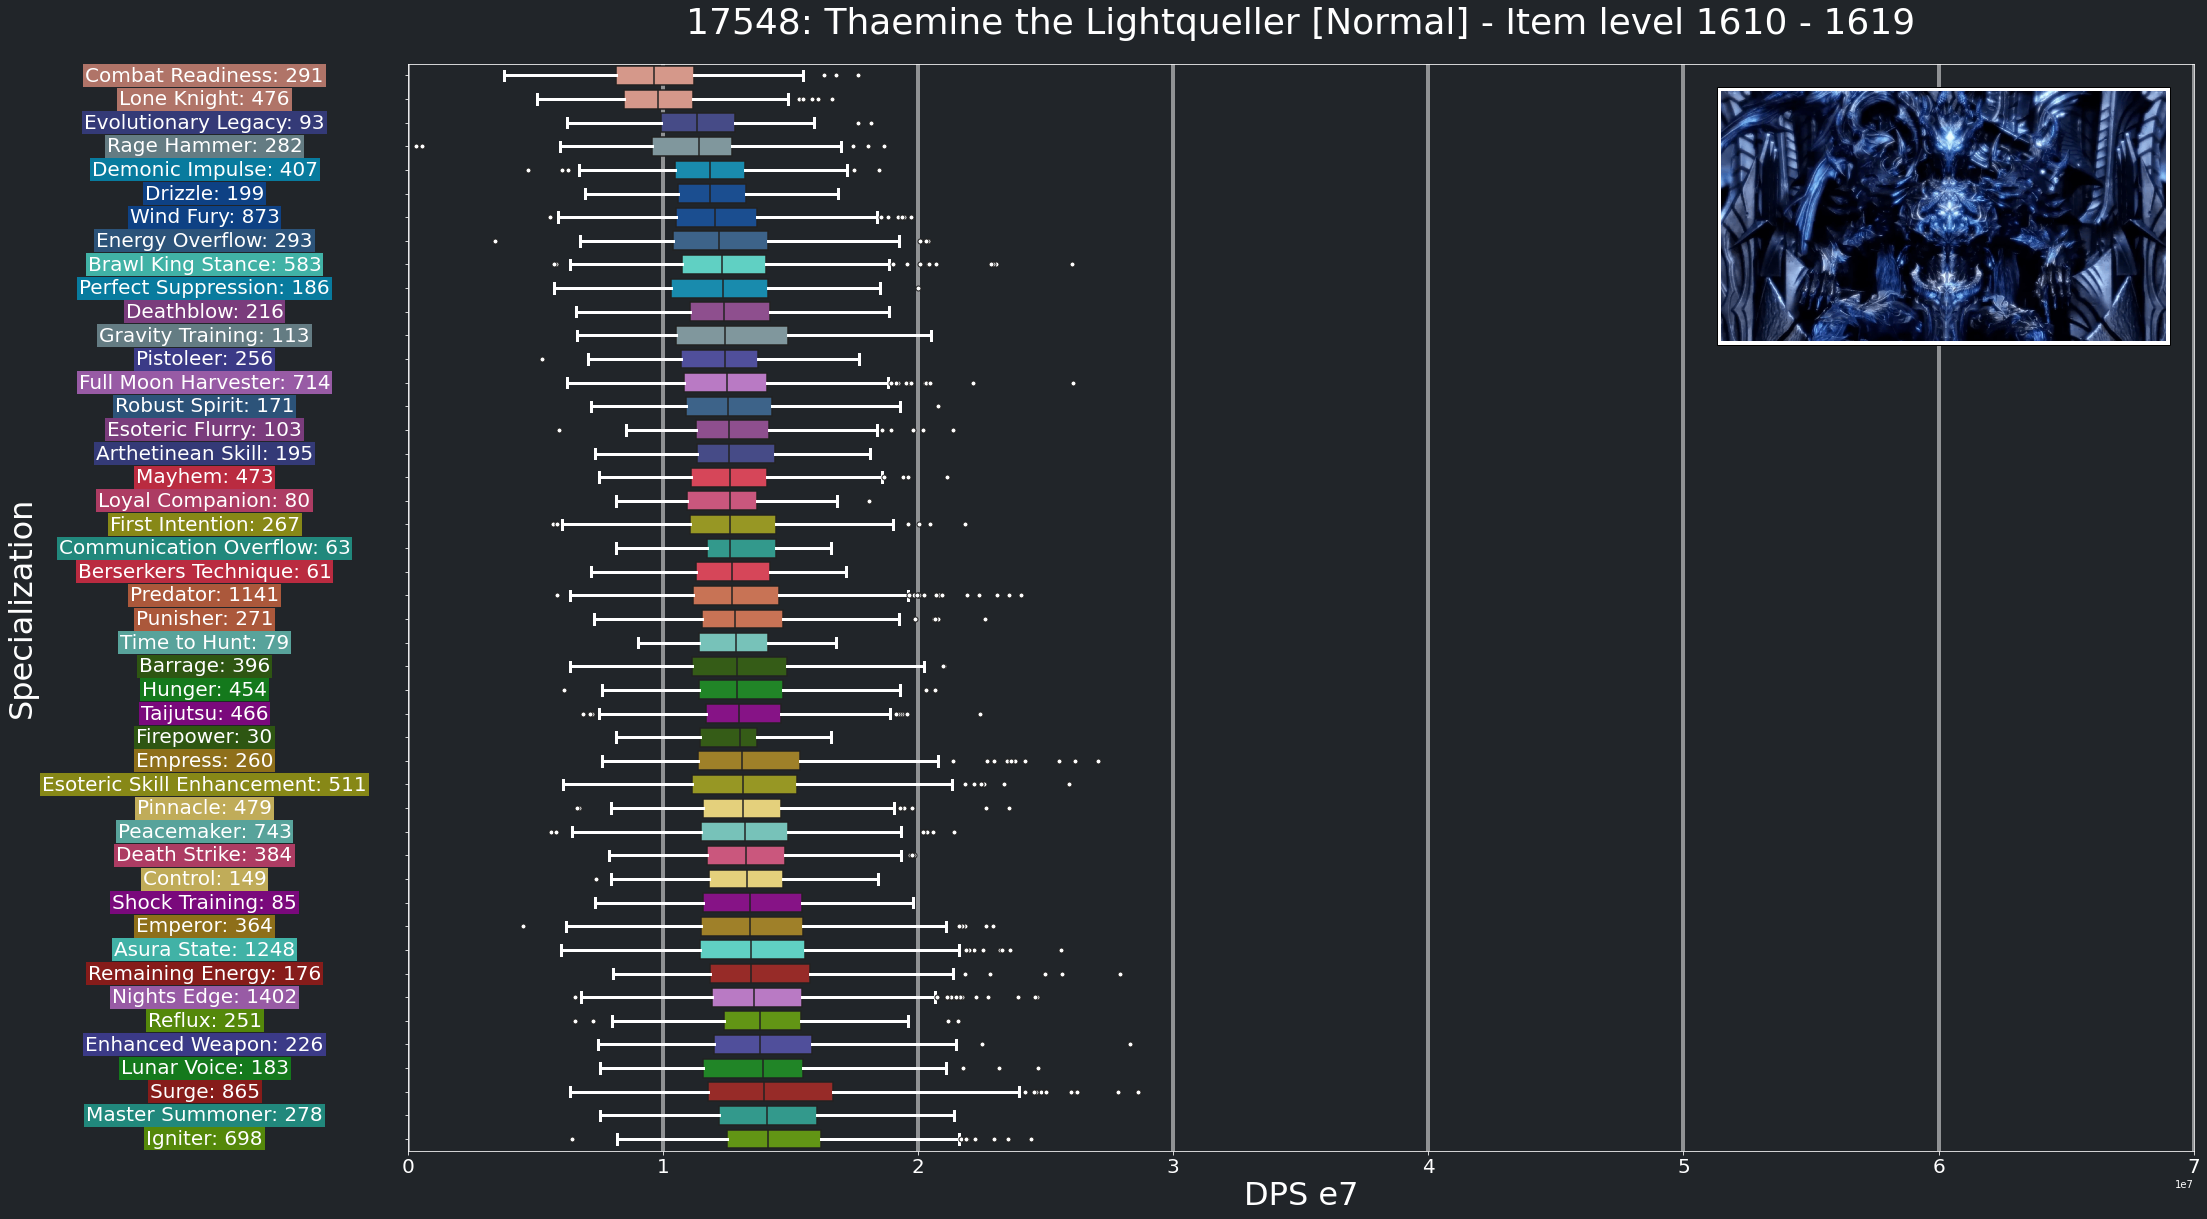 DPS_ThaeminetheLightquellerNormal_1610to1620_Median.png